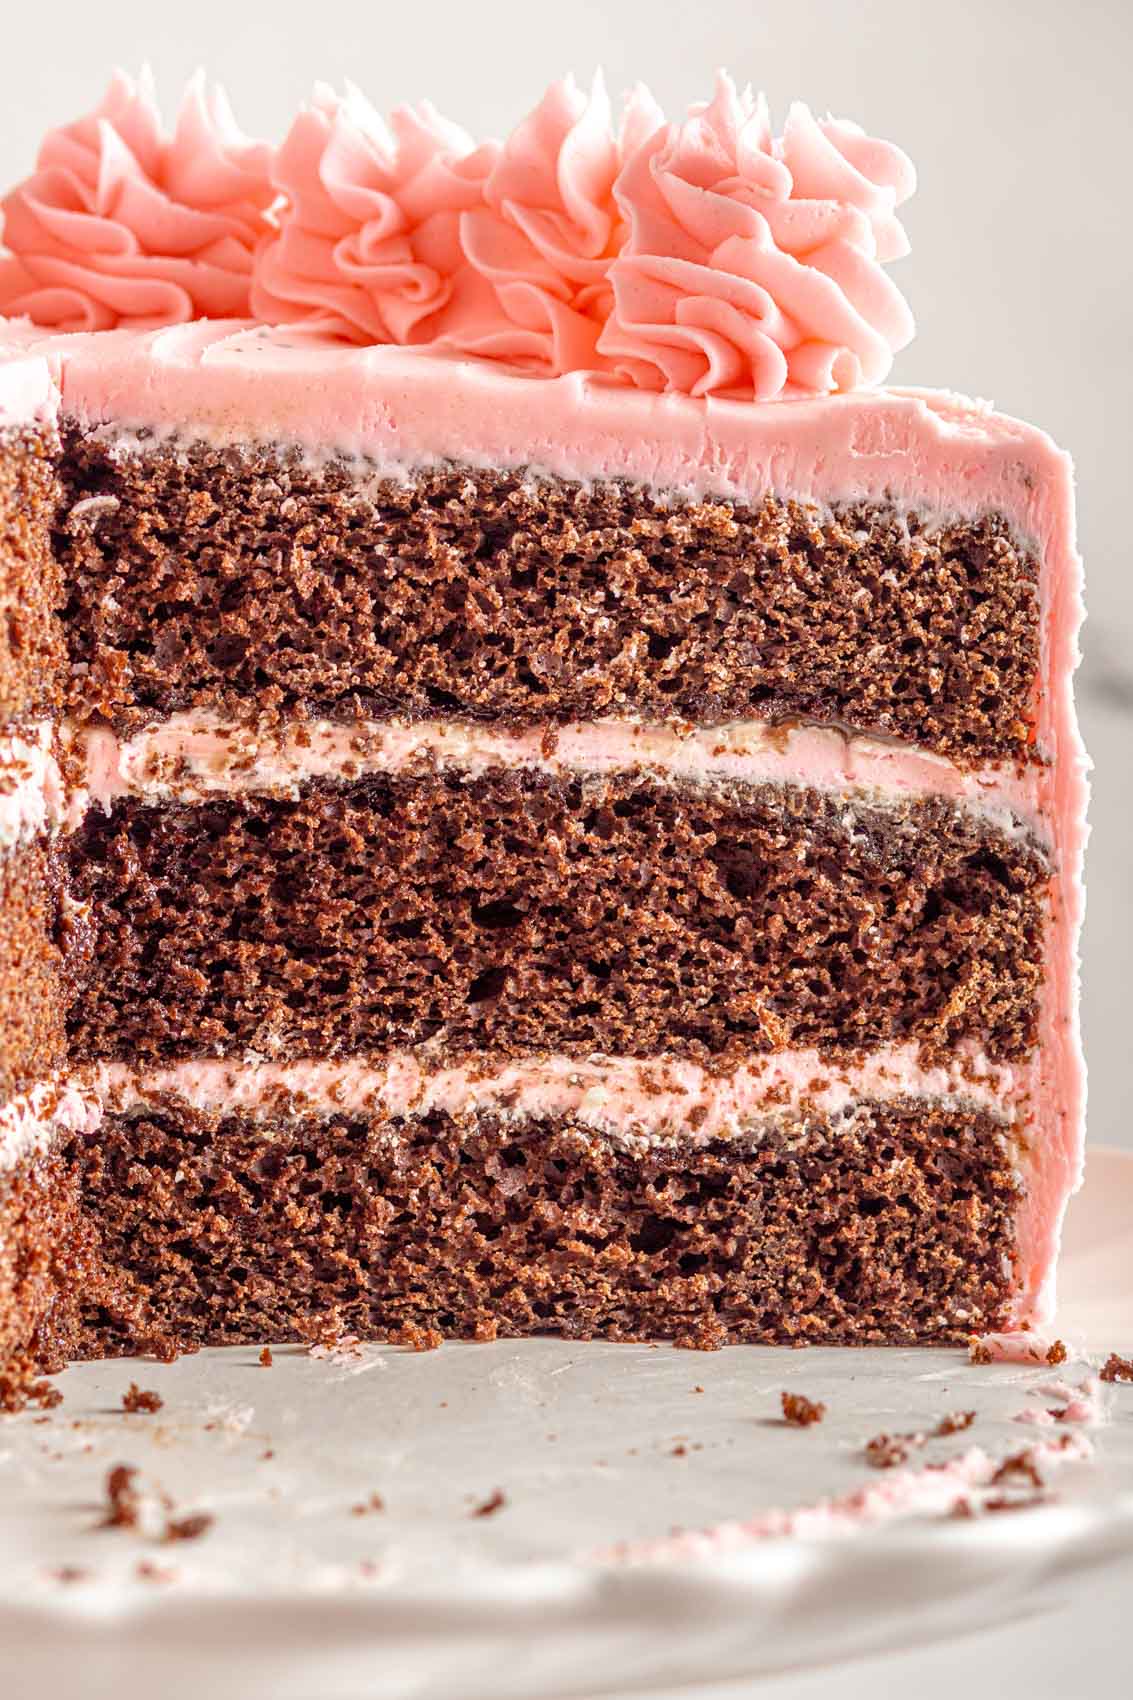 slice from the cake revealing the triple layer chocolate and strawberry frosting inside